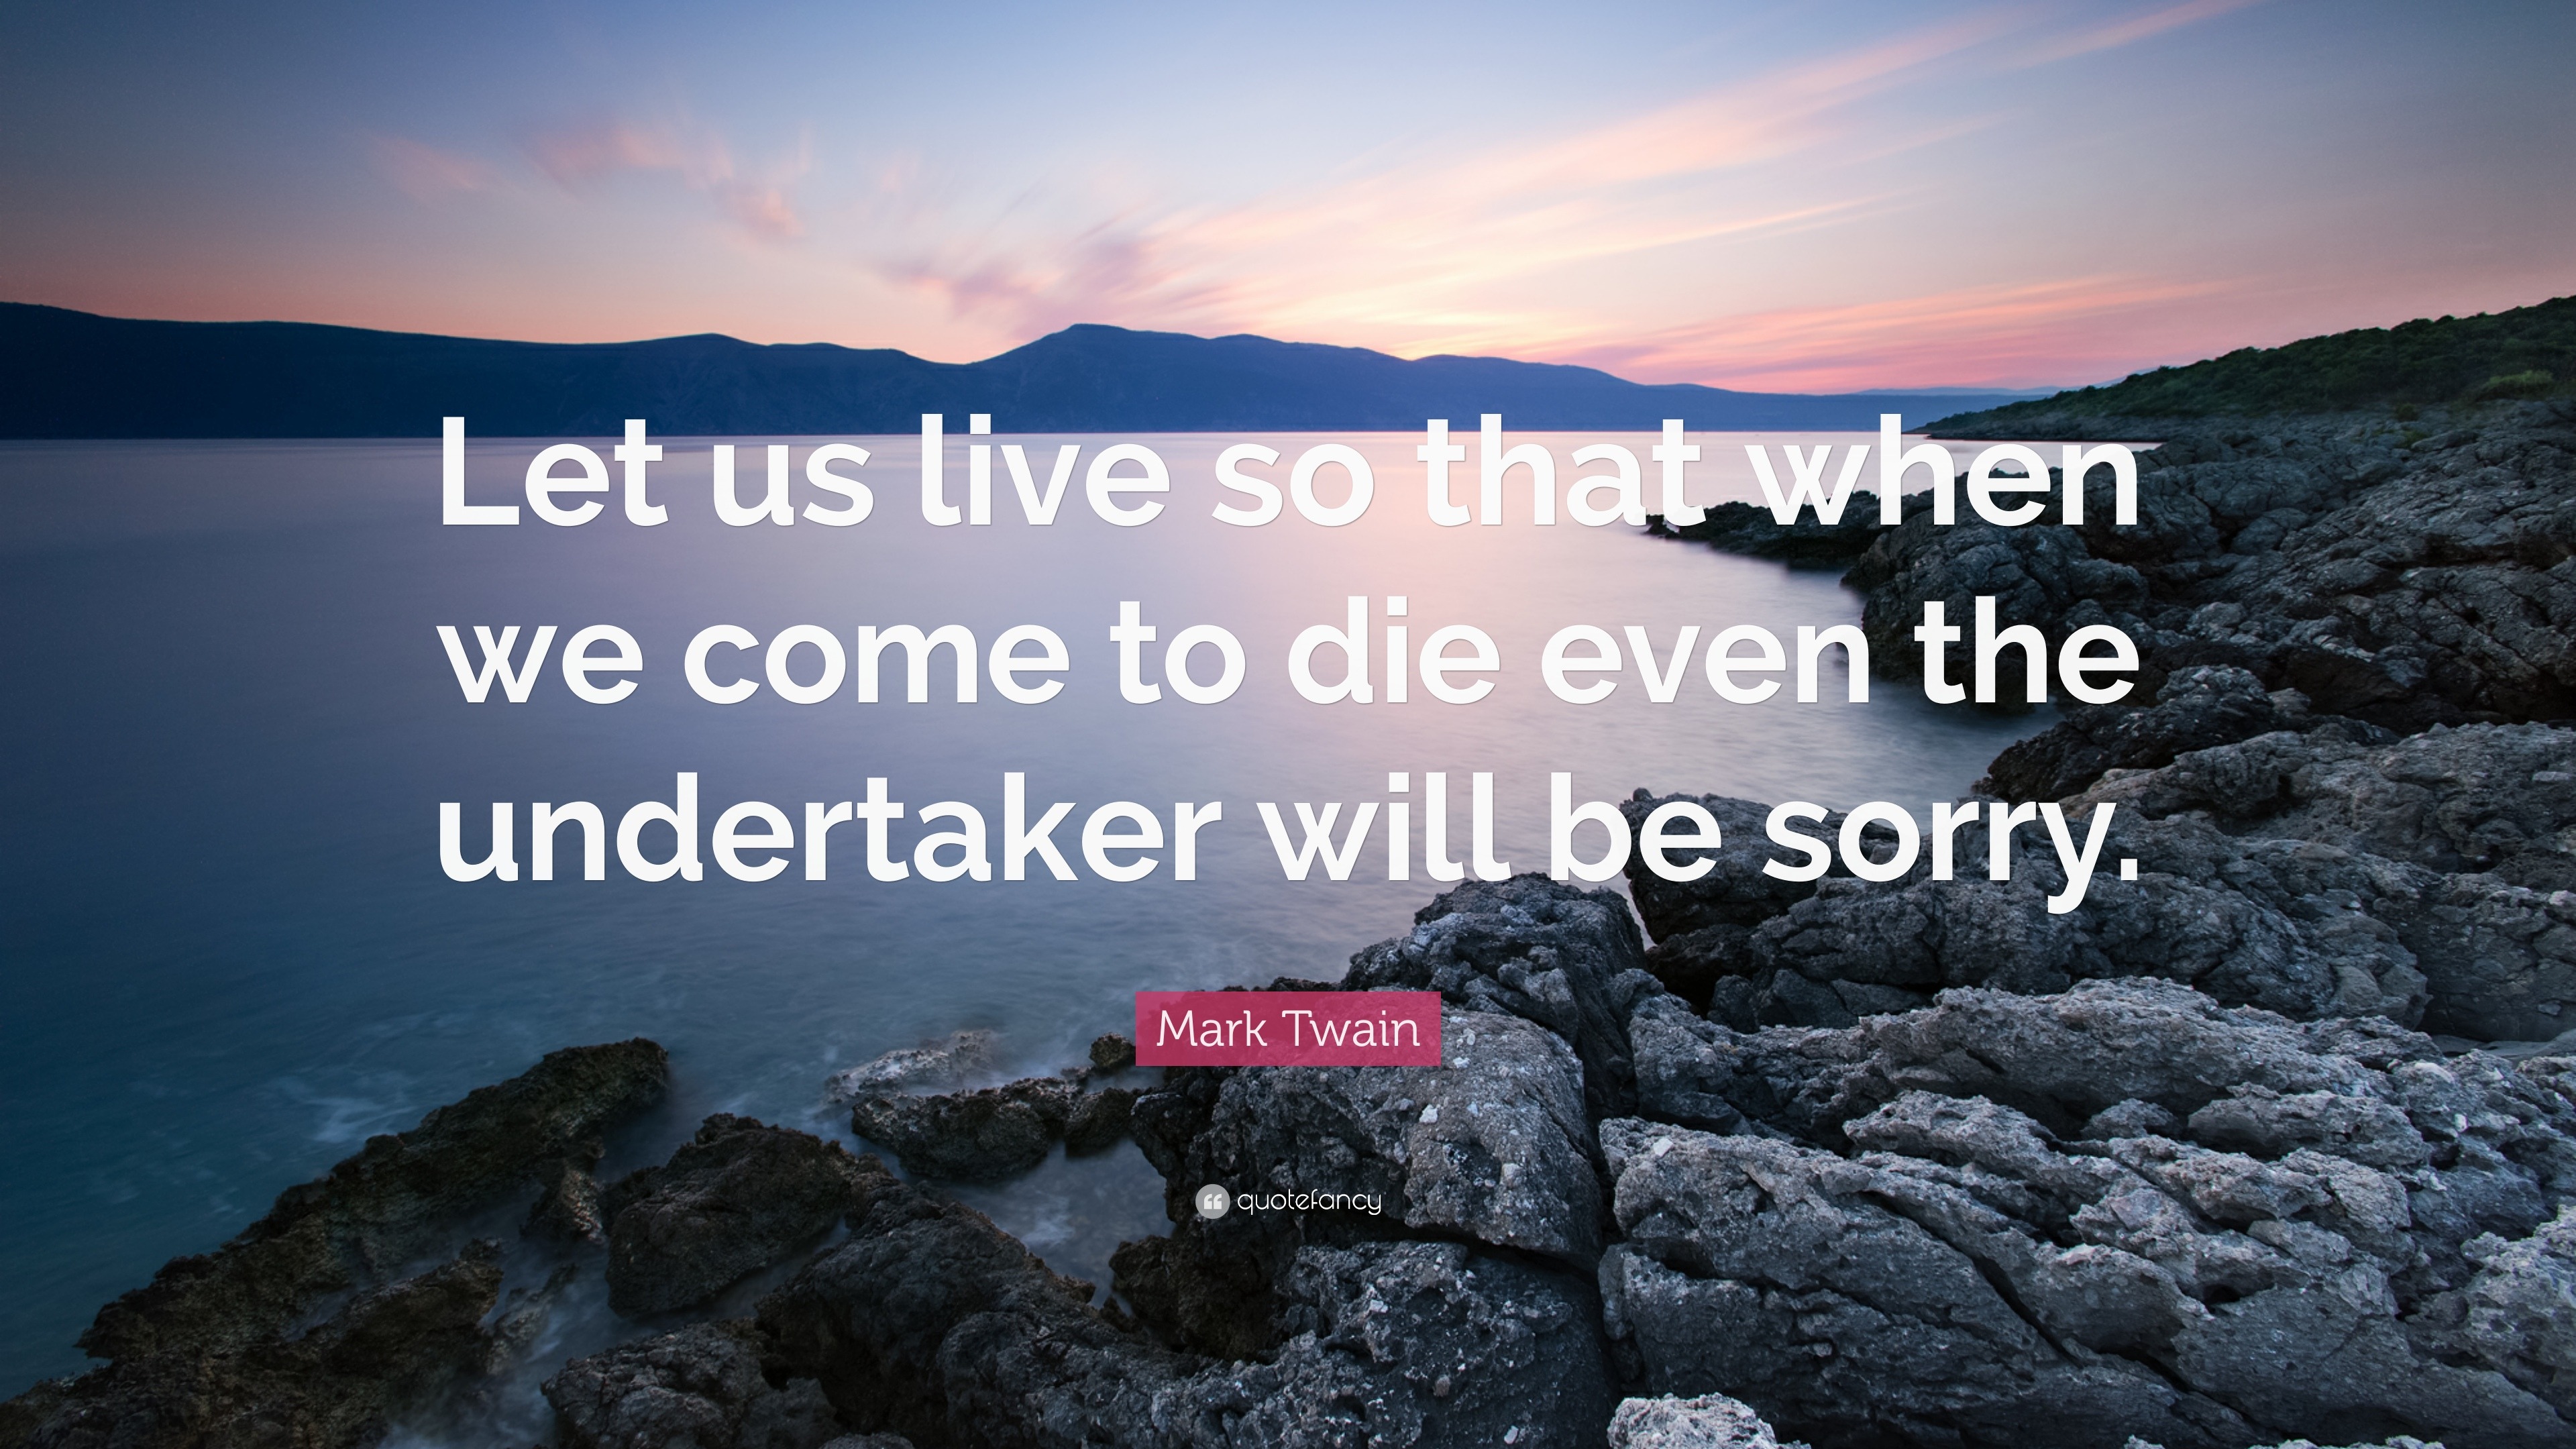 Mark Twain Quote: “Let us live so that when we come to die even the ...